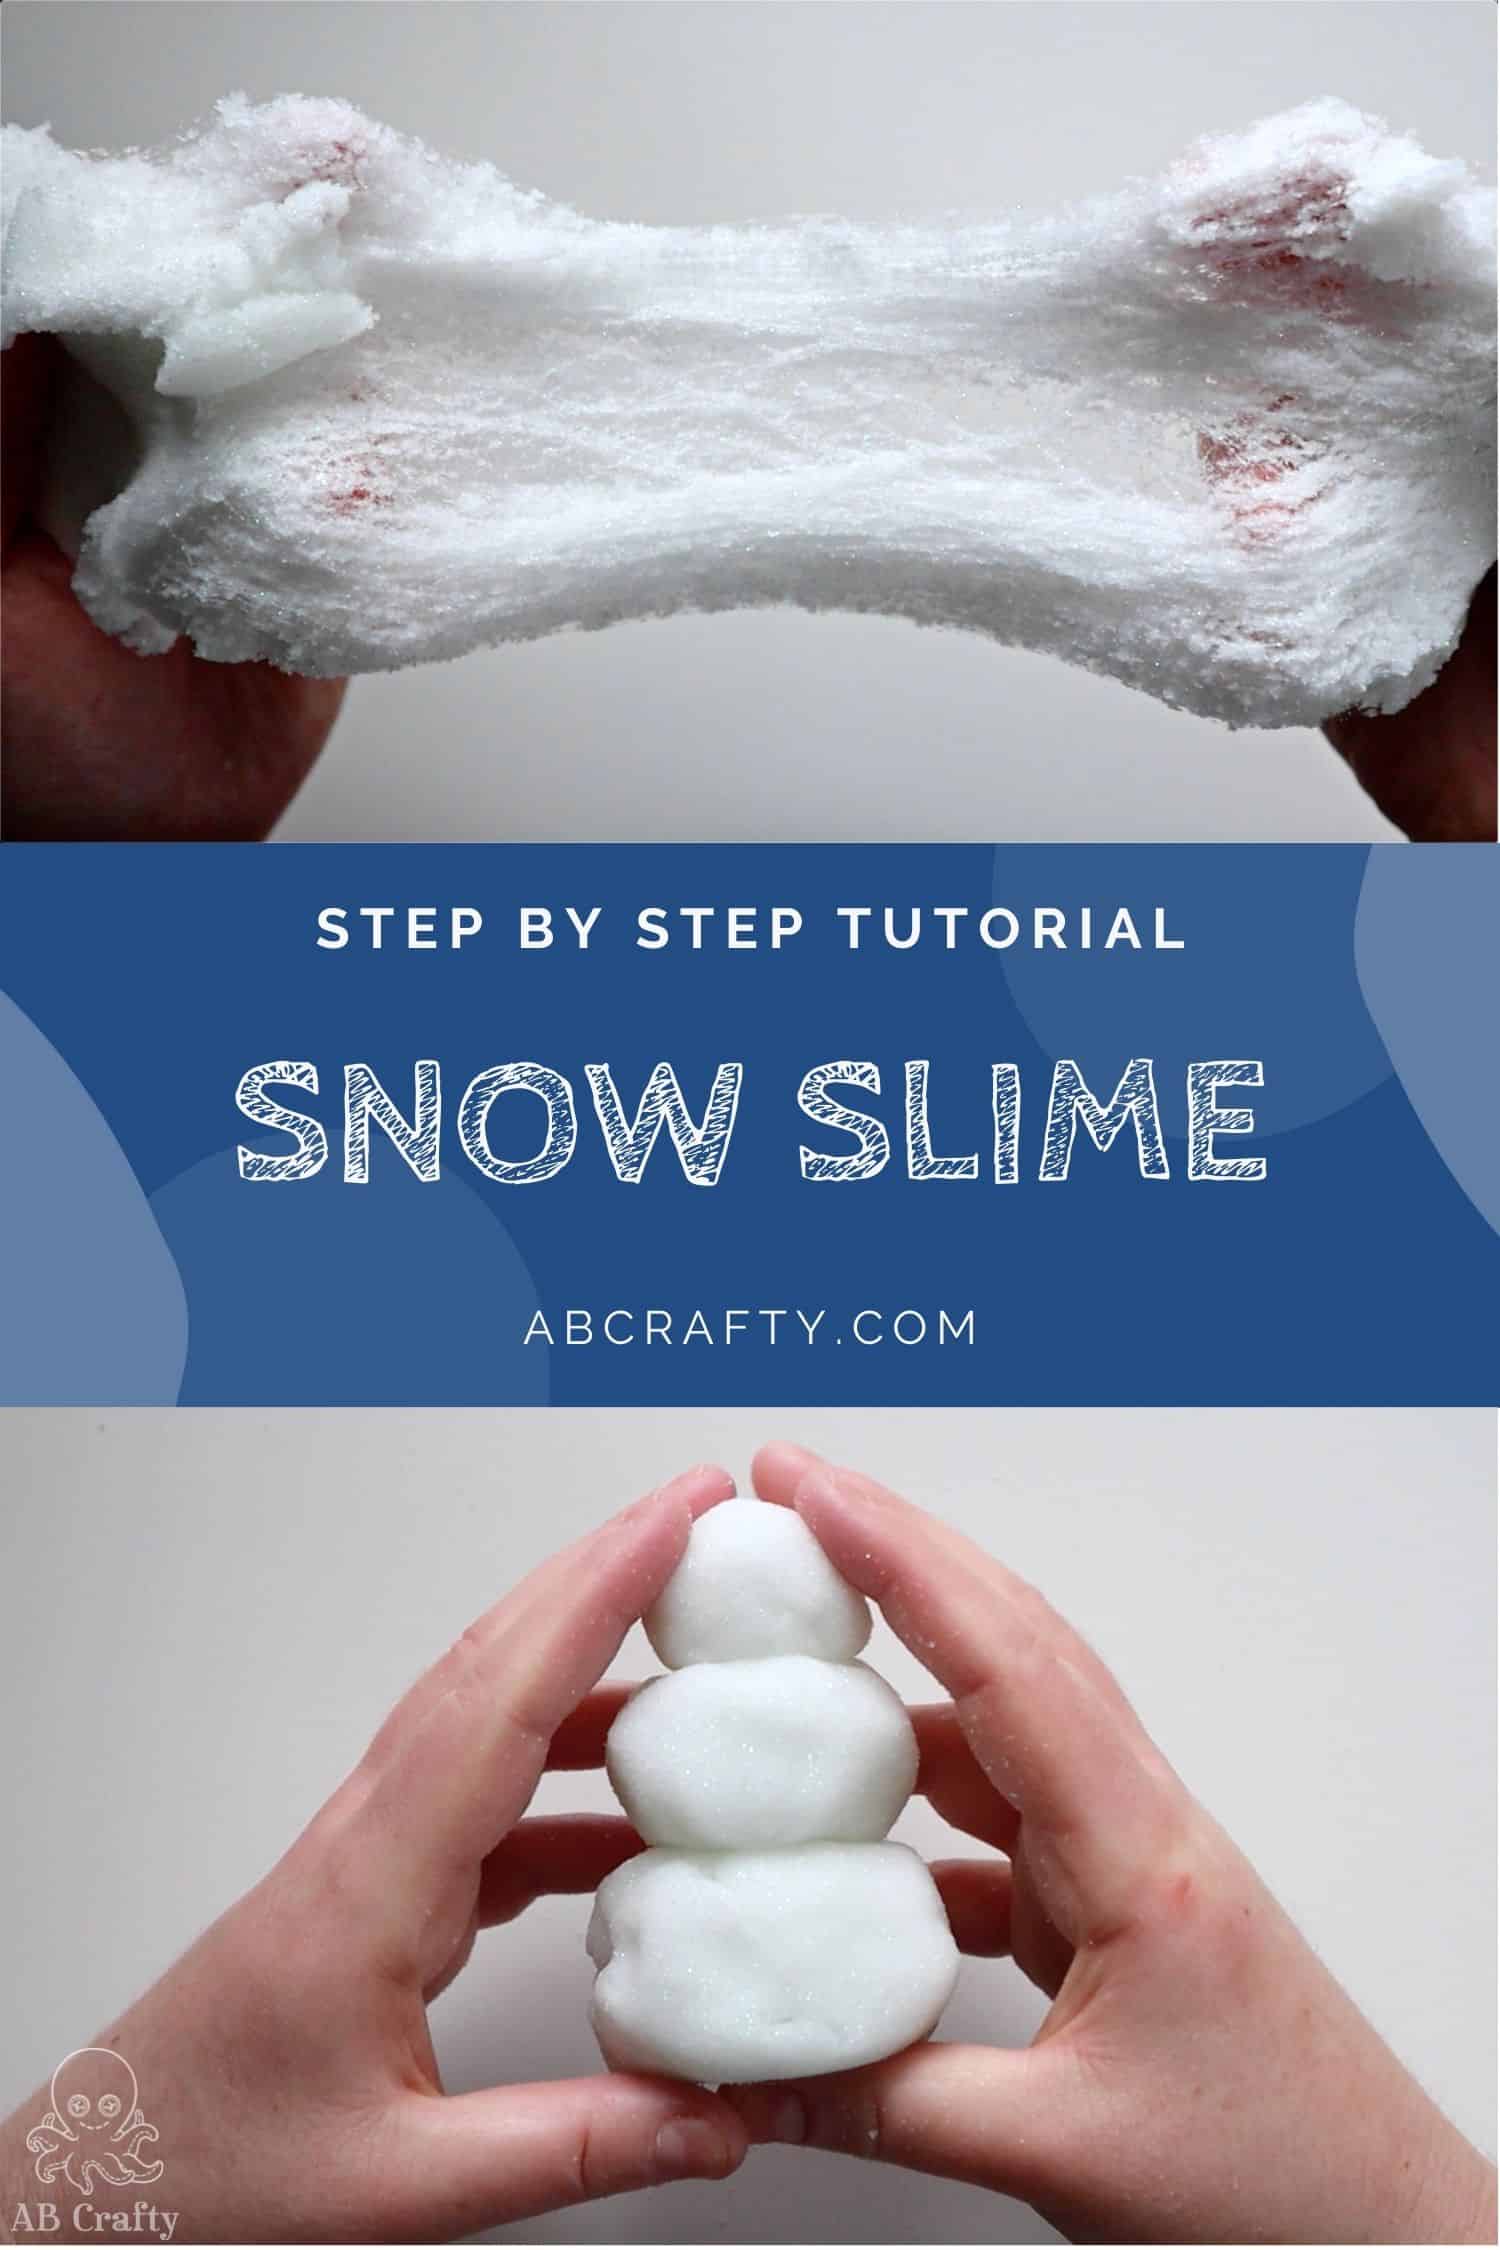 Let It Snow Instant Snow Powder for Slime - Makes 2 Gallons of Premium Fake Snow